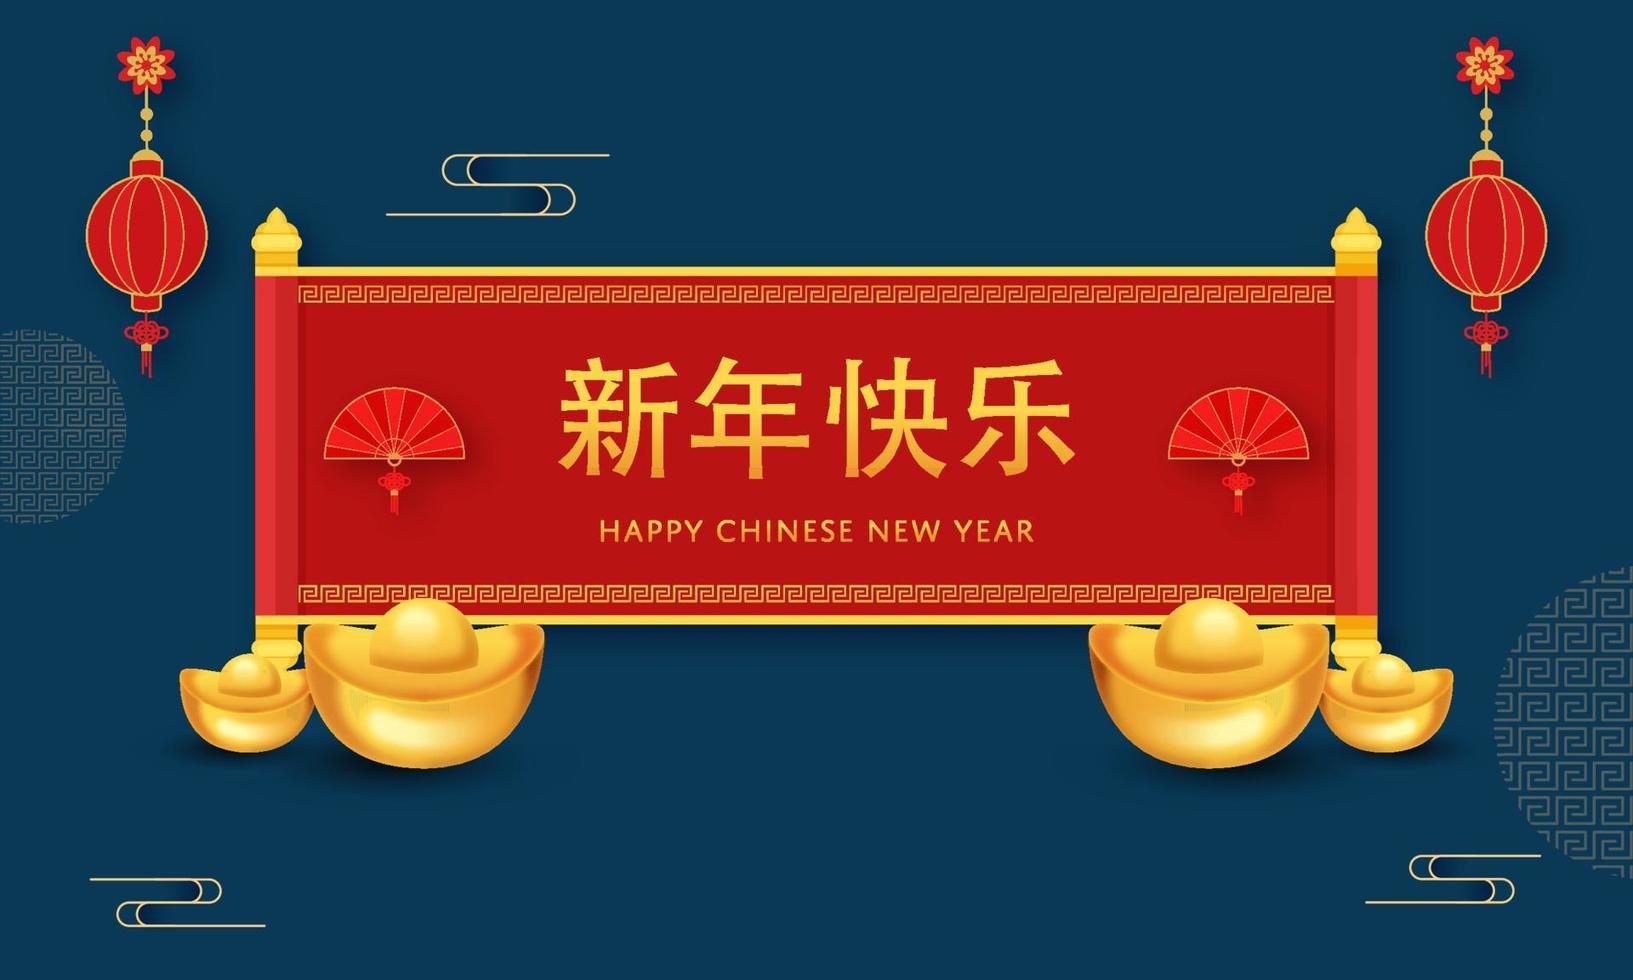 Happy Chinese New Year Mandarin Text Over Red Paper Scroll With Folding Fans, Realistic Ingots And Lanterns Hang On Blue Background. vector